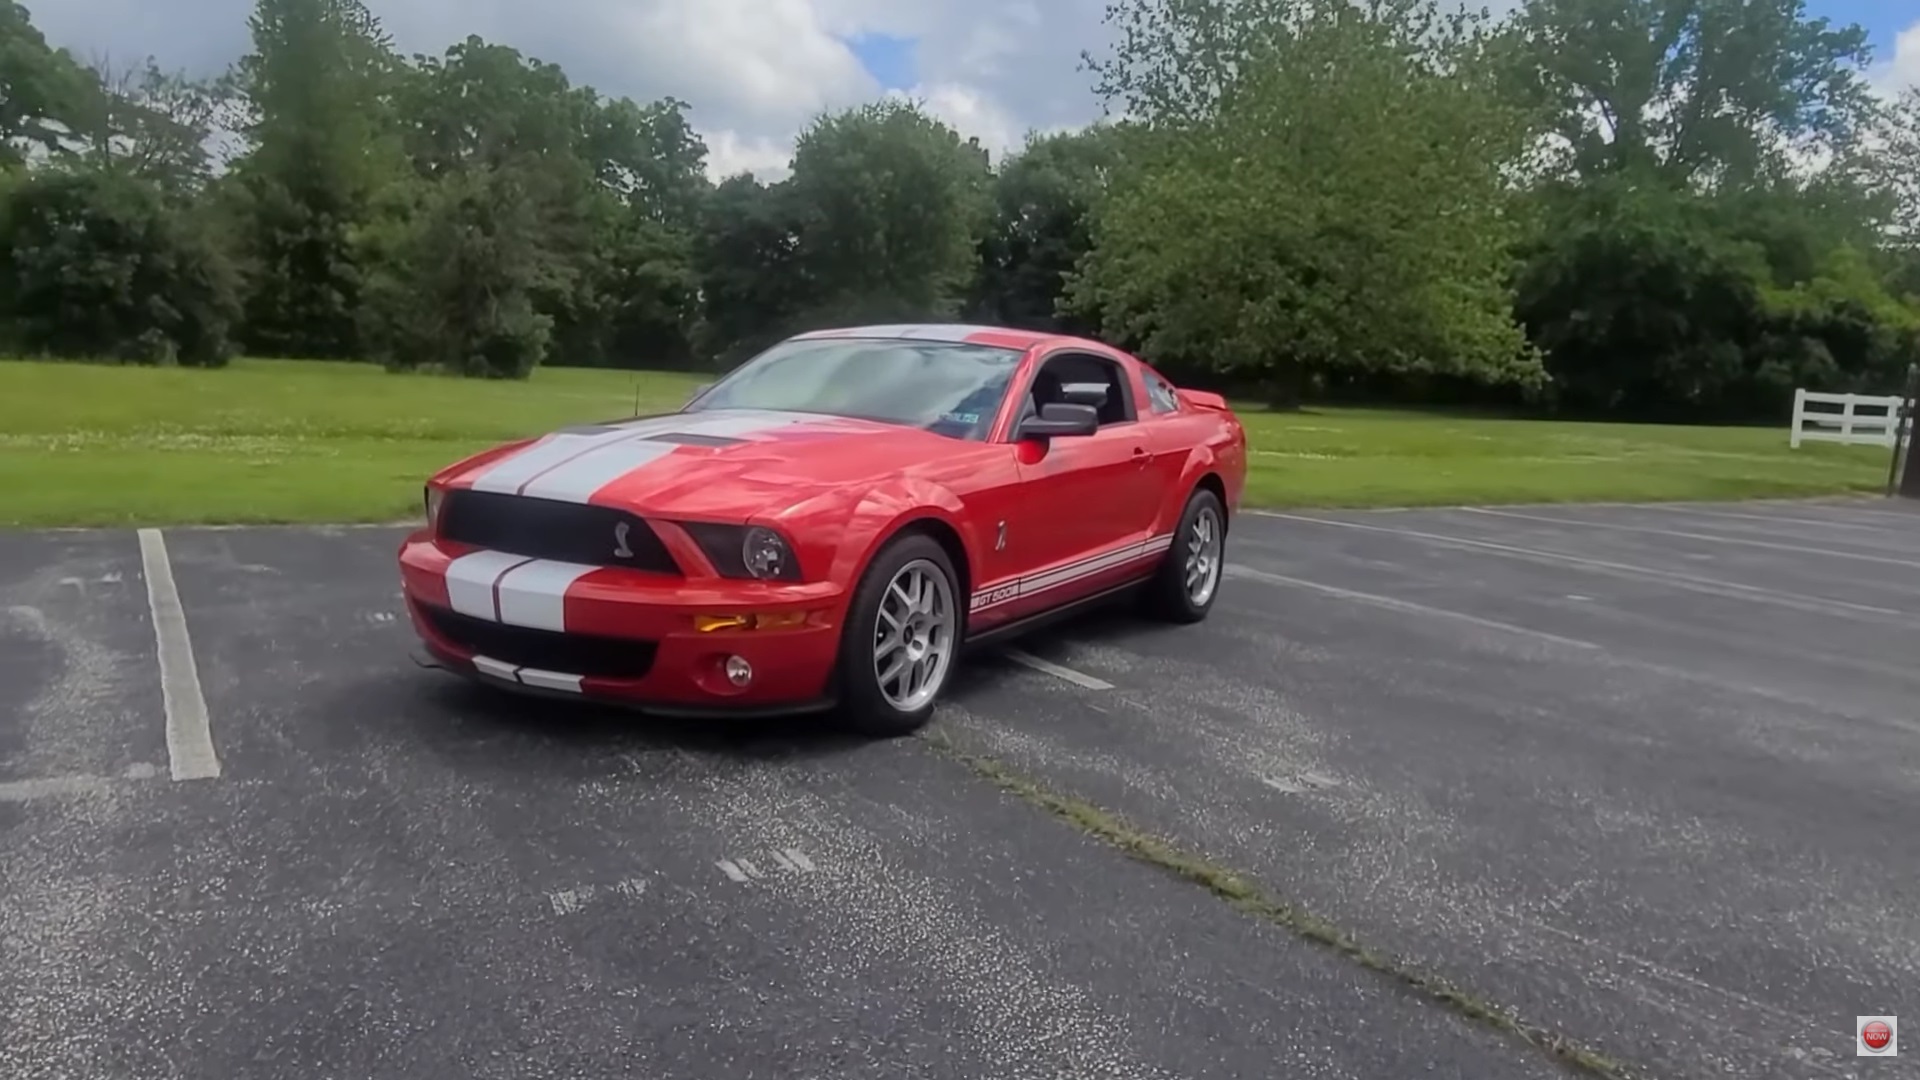 Video: 2008 Ford Mustang Shelby GT500 Quick Tour + POV Drive